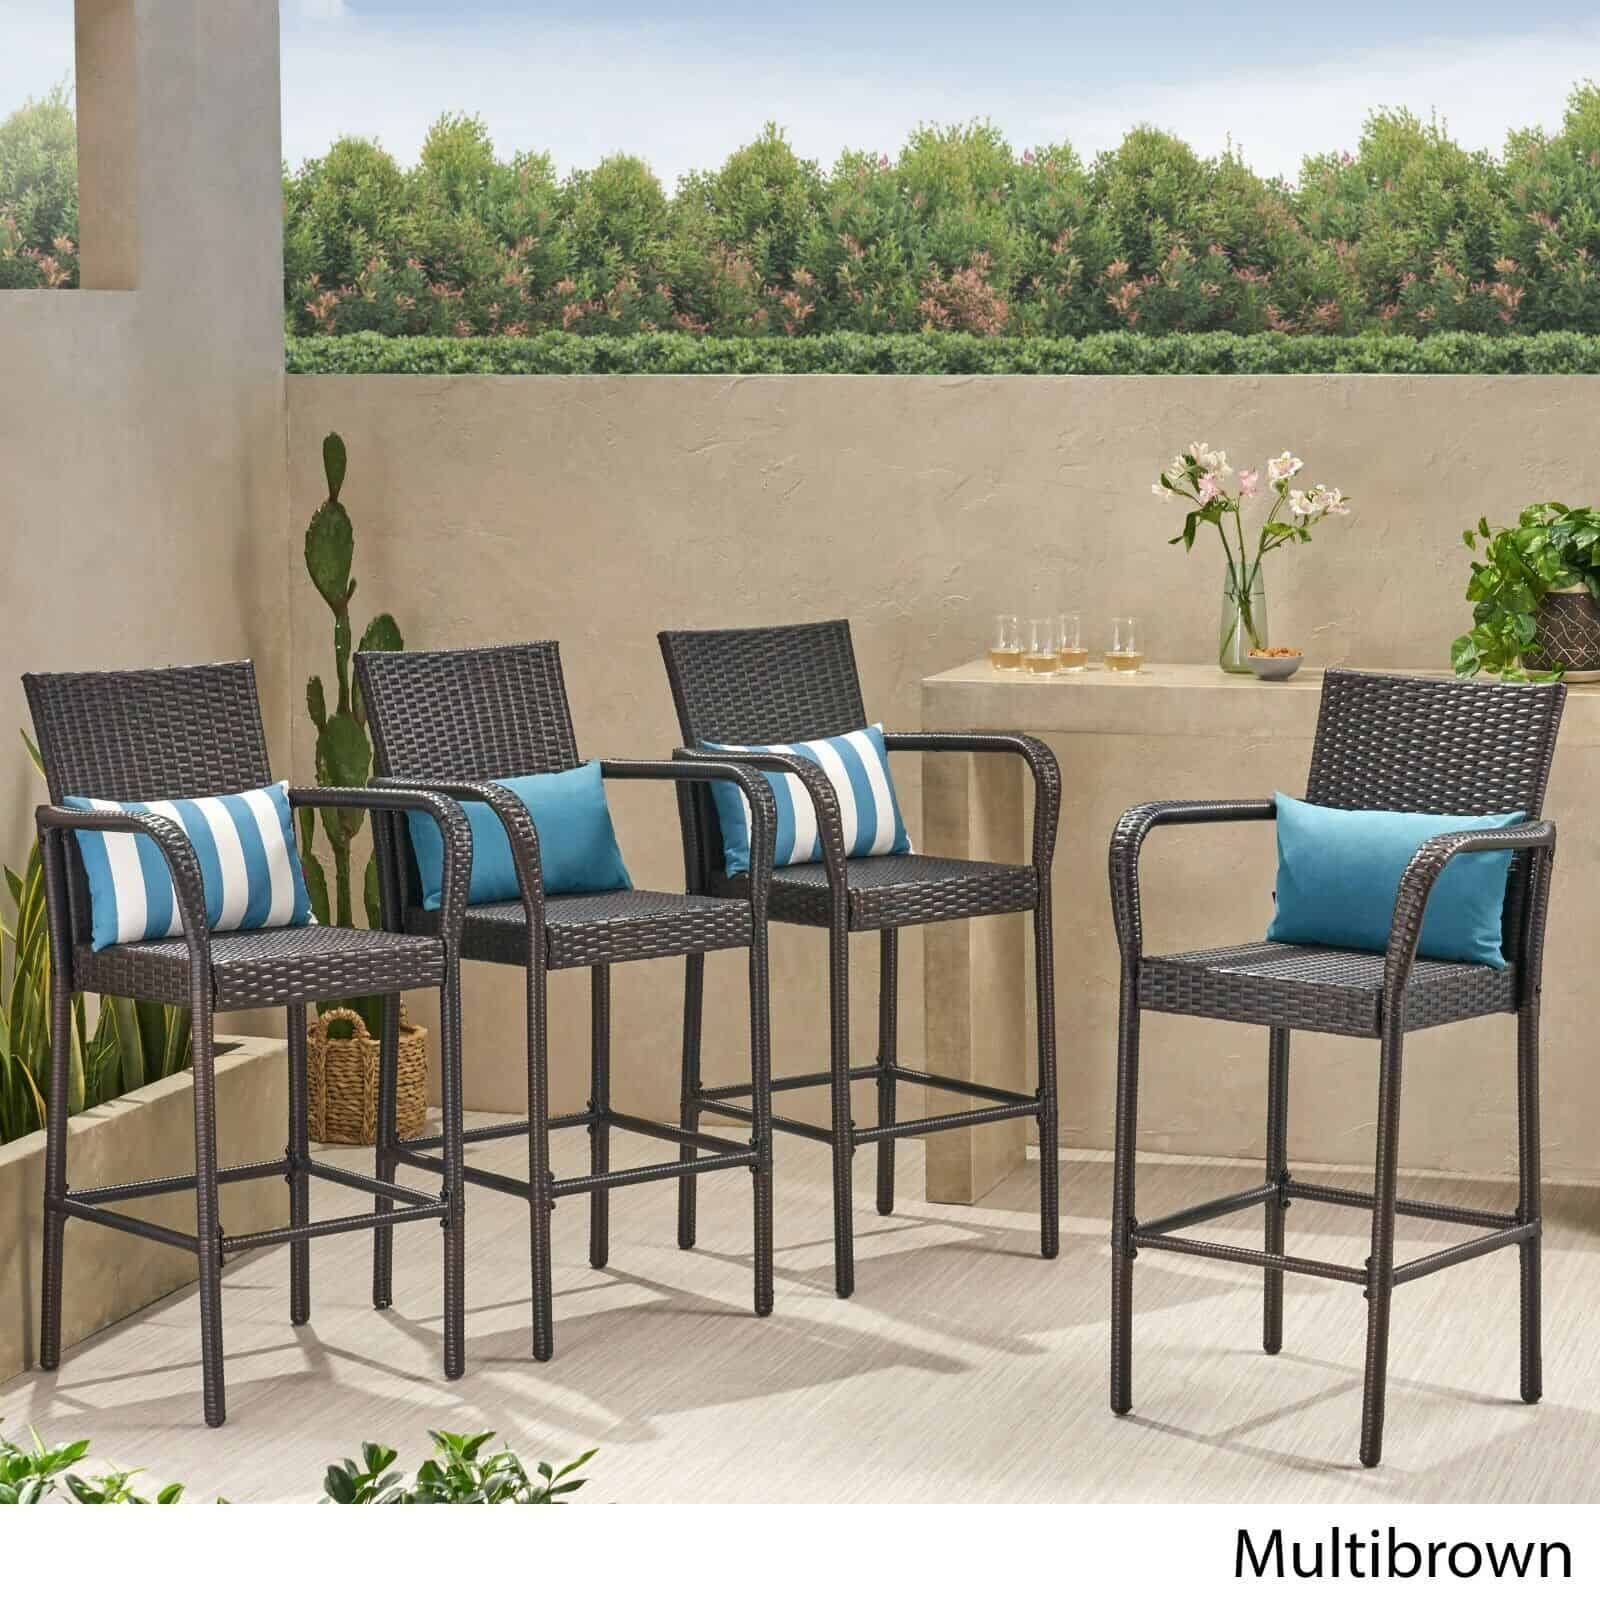 Four outdoor wicker bar stools with blue cushions.